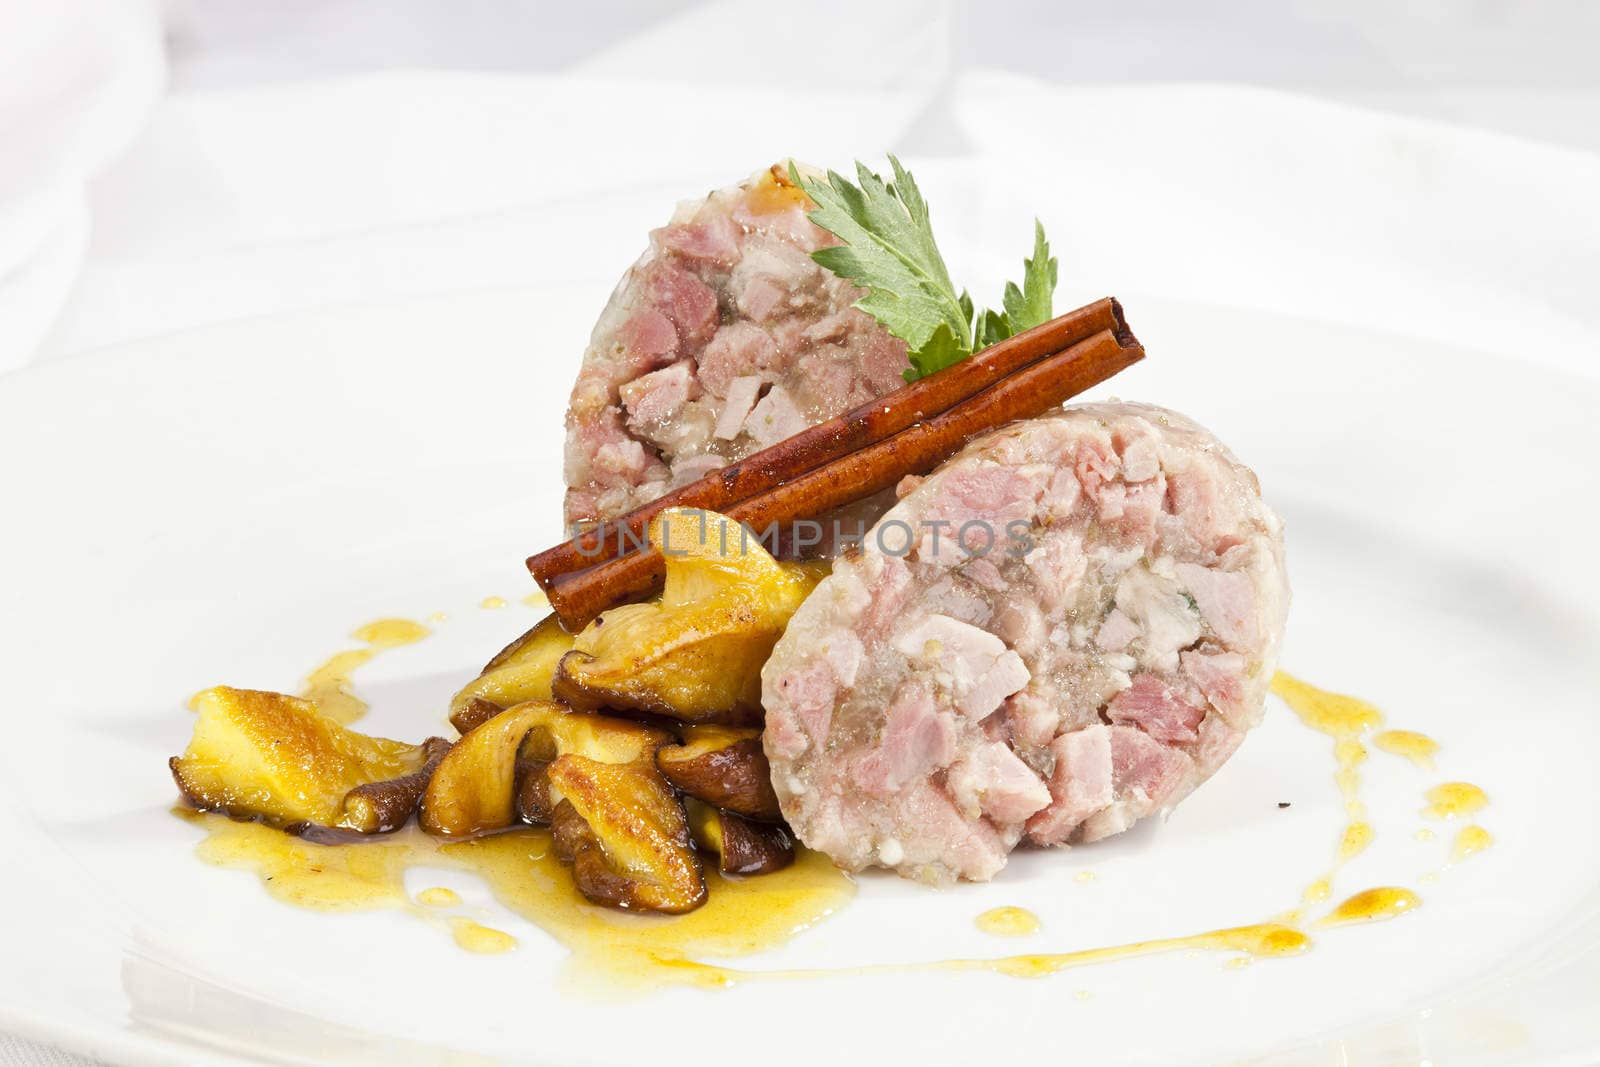 Headcheese with mushrooms by hanusst